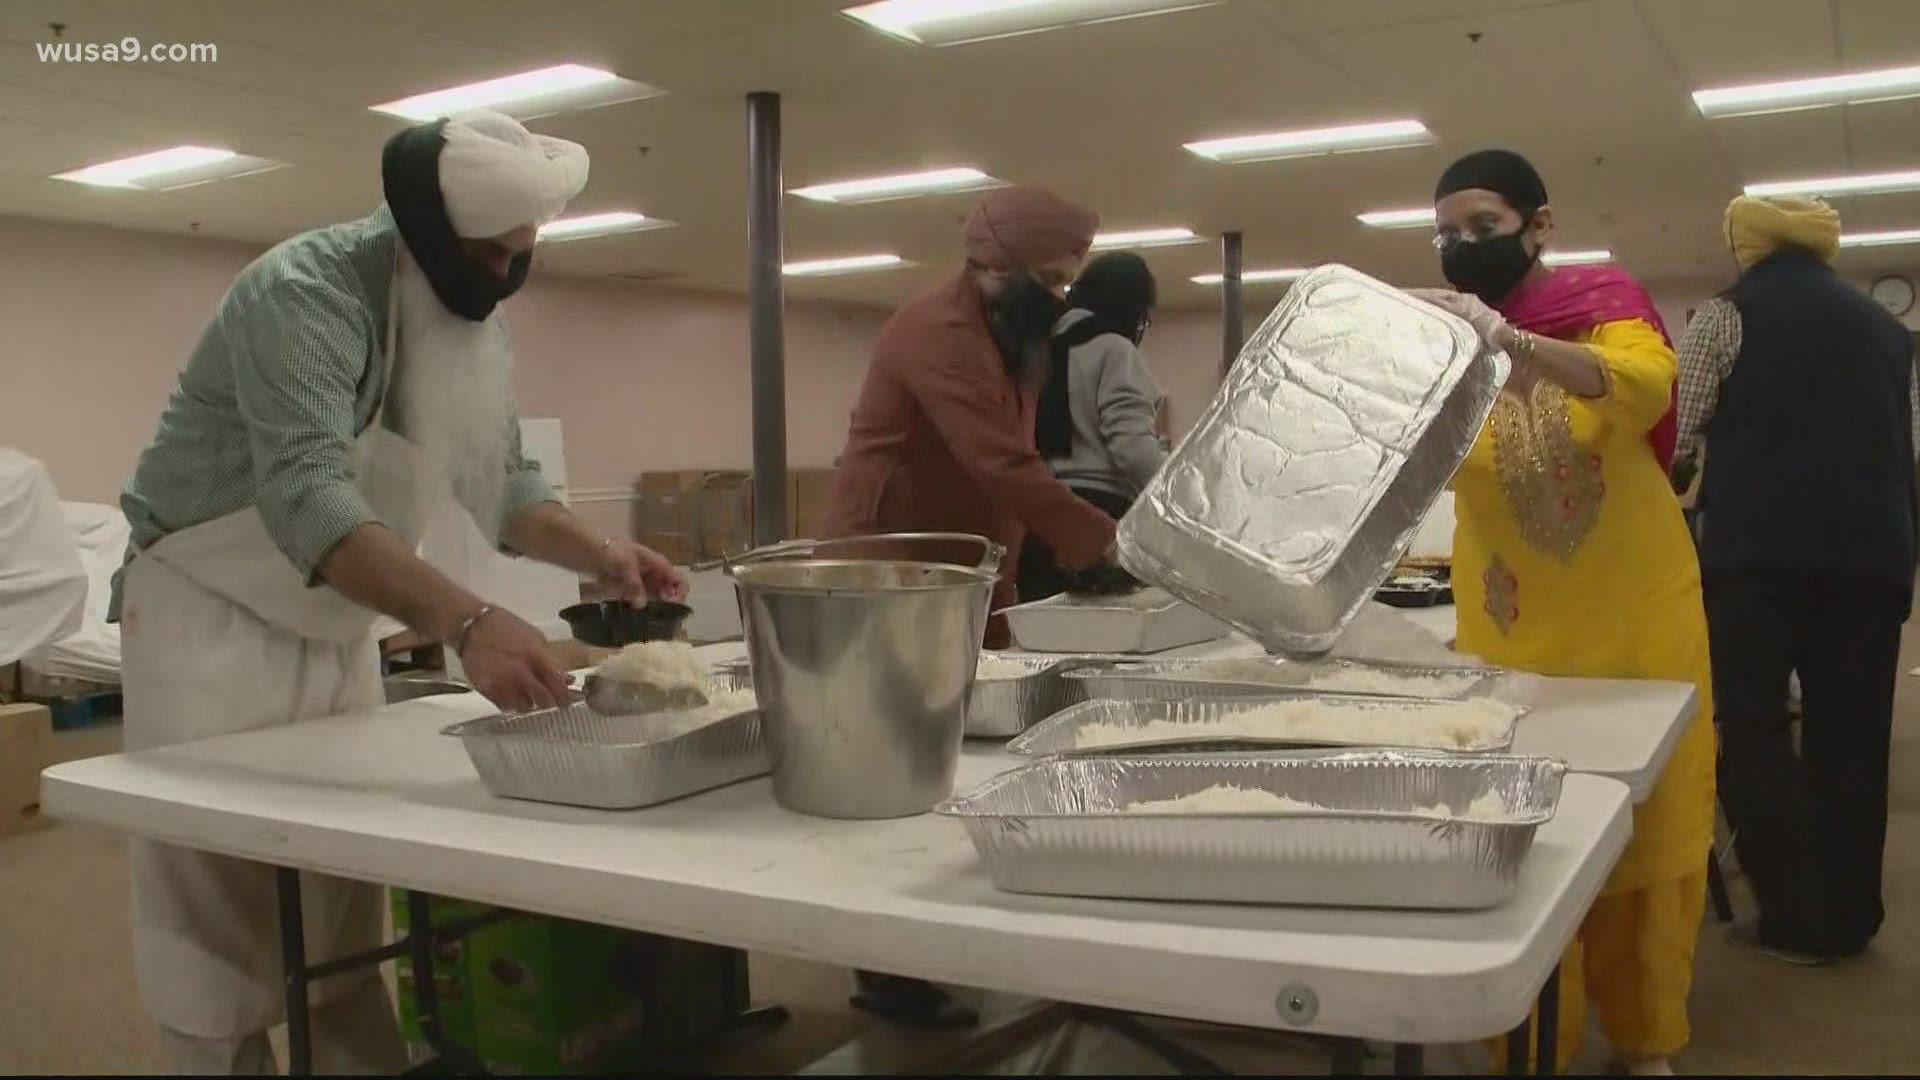 Today is the birth-anniversary of the founder of the Sikh faith. To celebrate members of that community decided to hand out meals to those in need